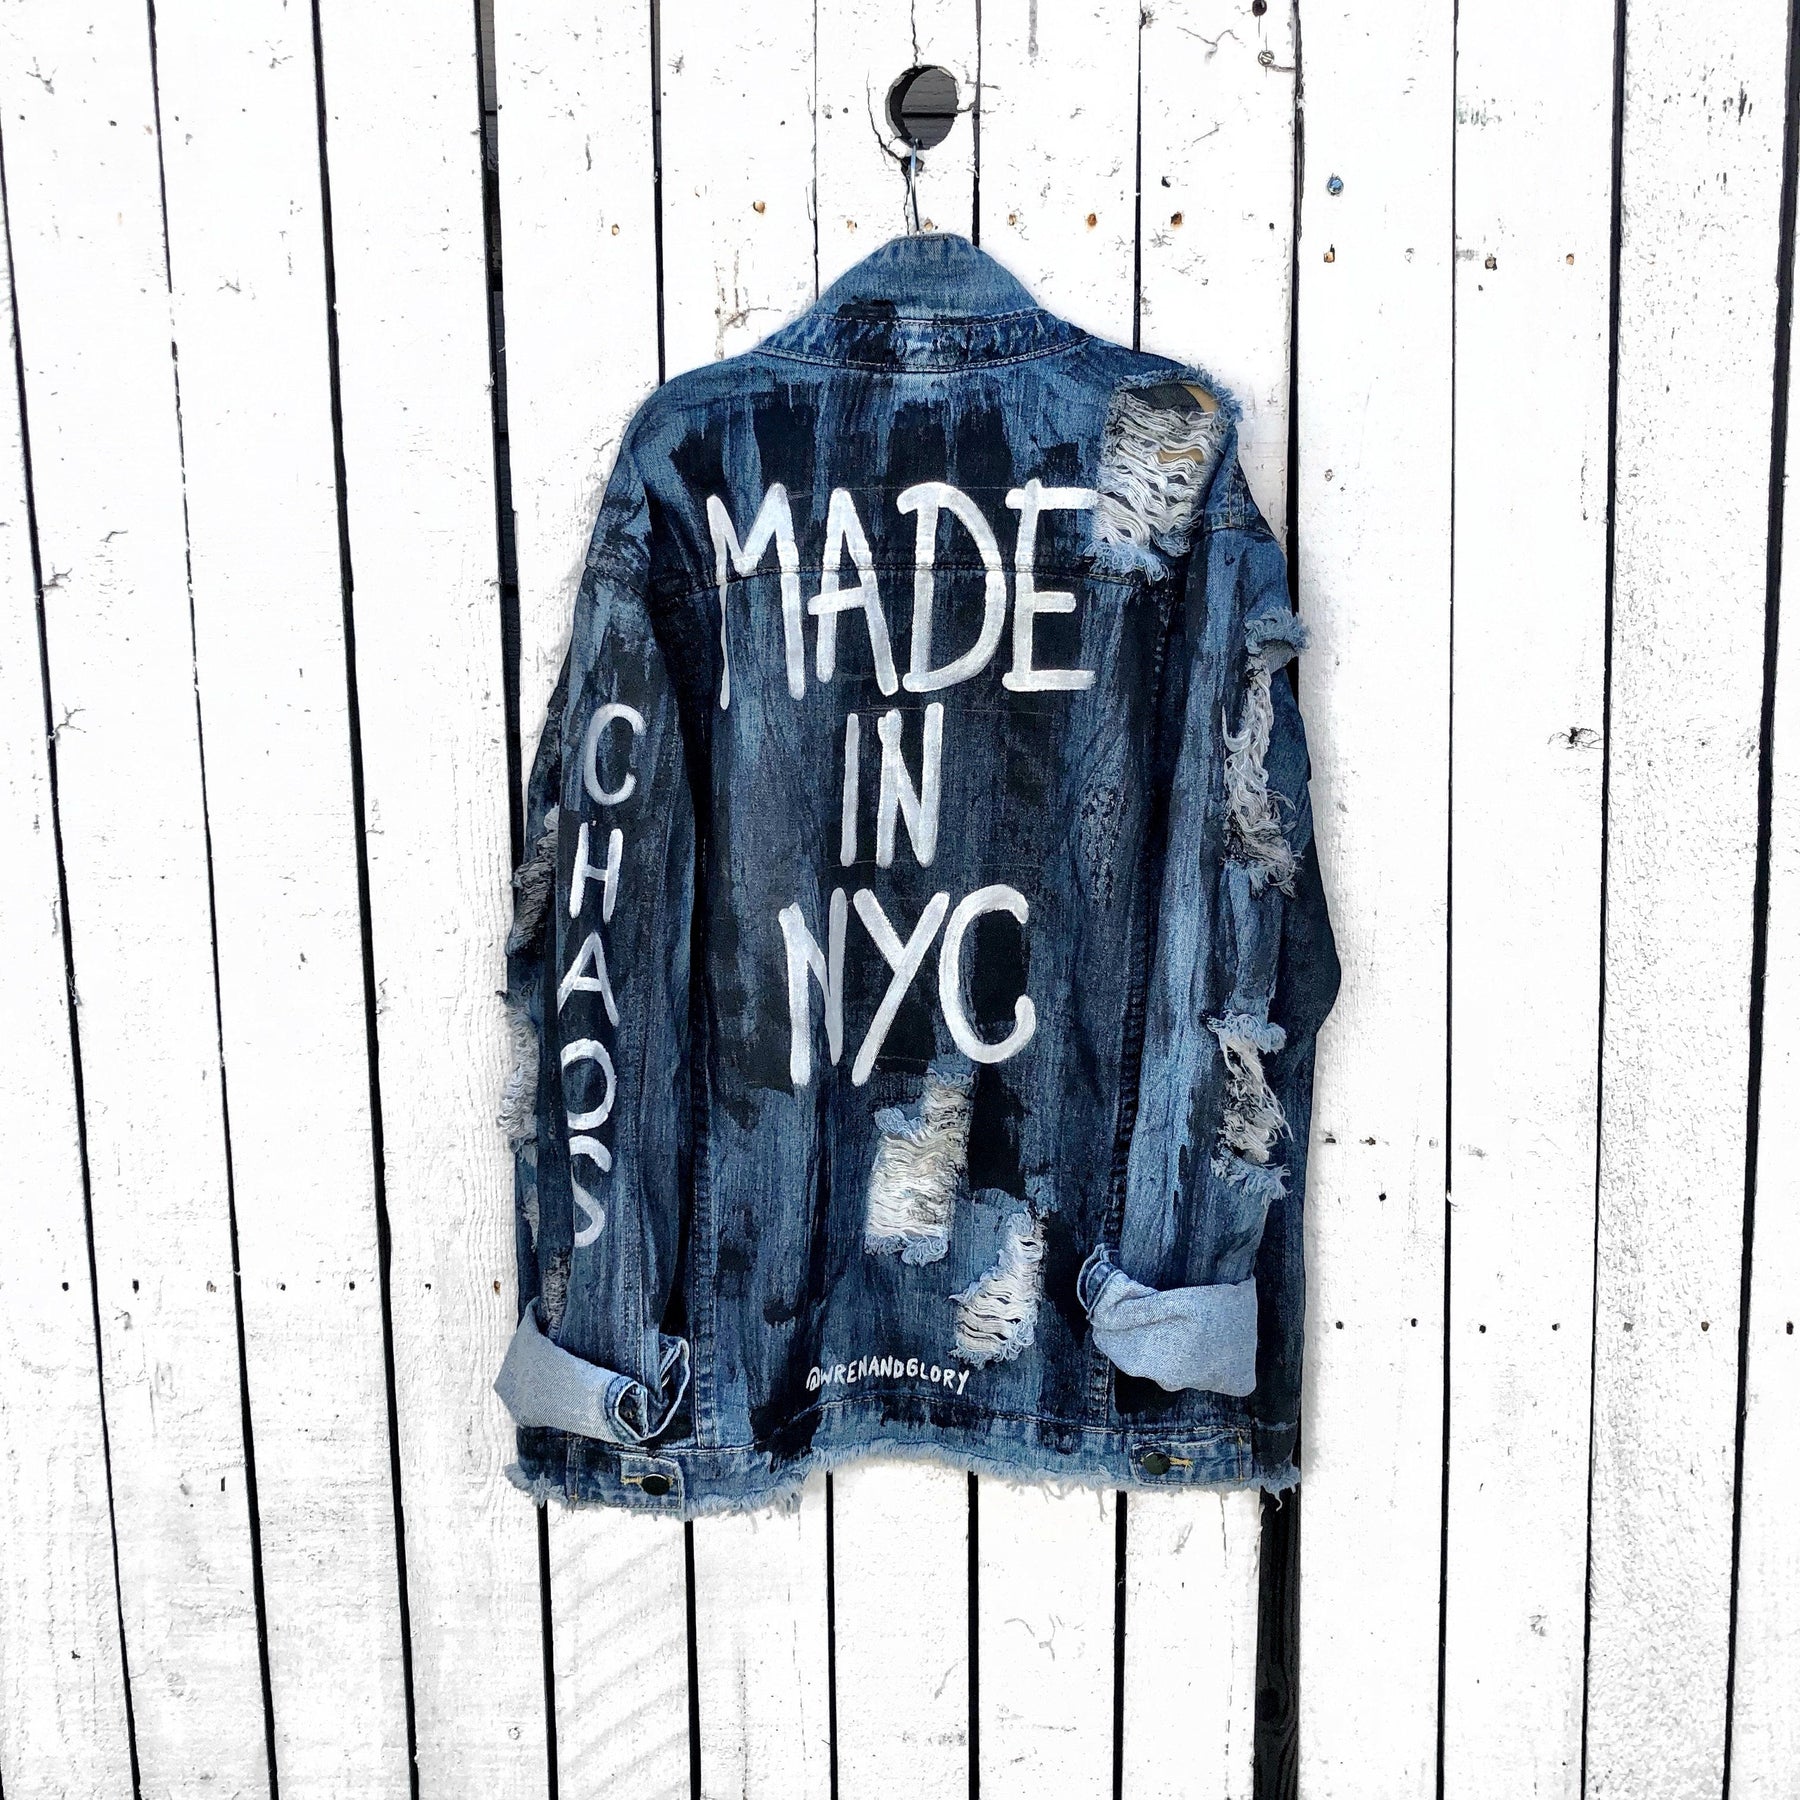 Medium blue denim wash. Black base all over, with 'MADE IN NYC' painted on back in white. CHAOS painted down the arm in white. Assorted 1" pins on bottom left, bottom pocket area. Signed @wrenandglory.